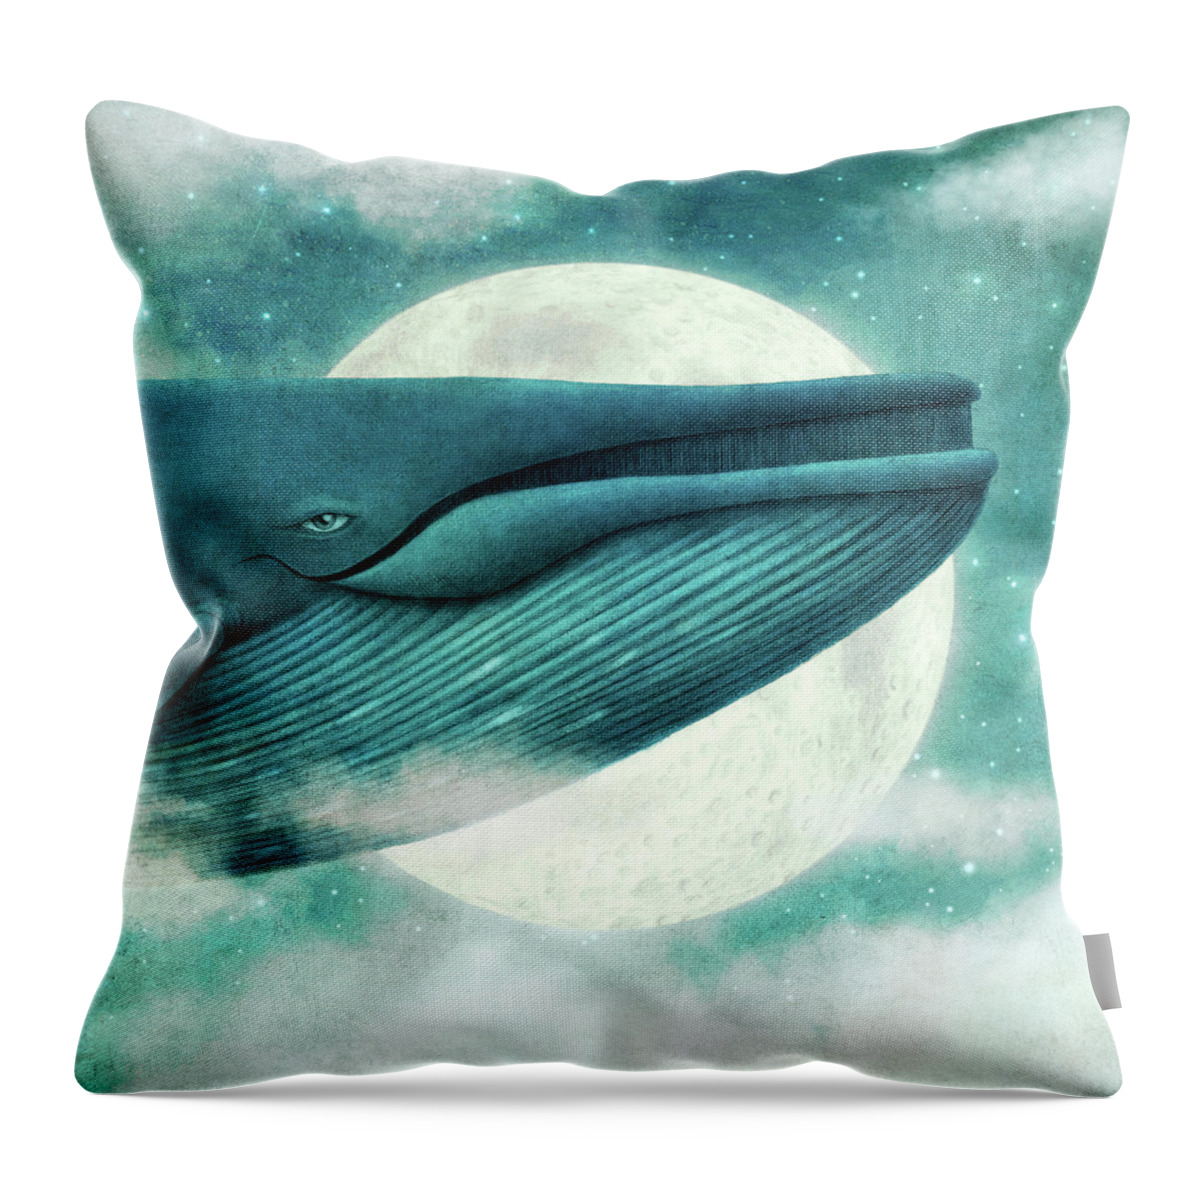 Whale Throw Pillow featuring the drawing The Great Whale by Eric Fan